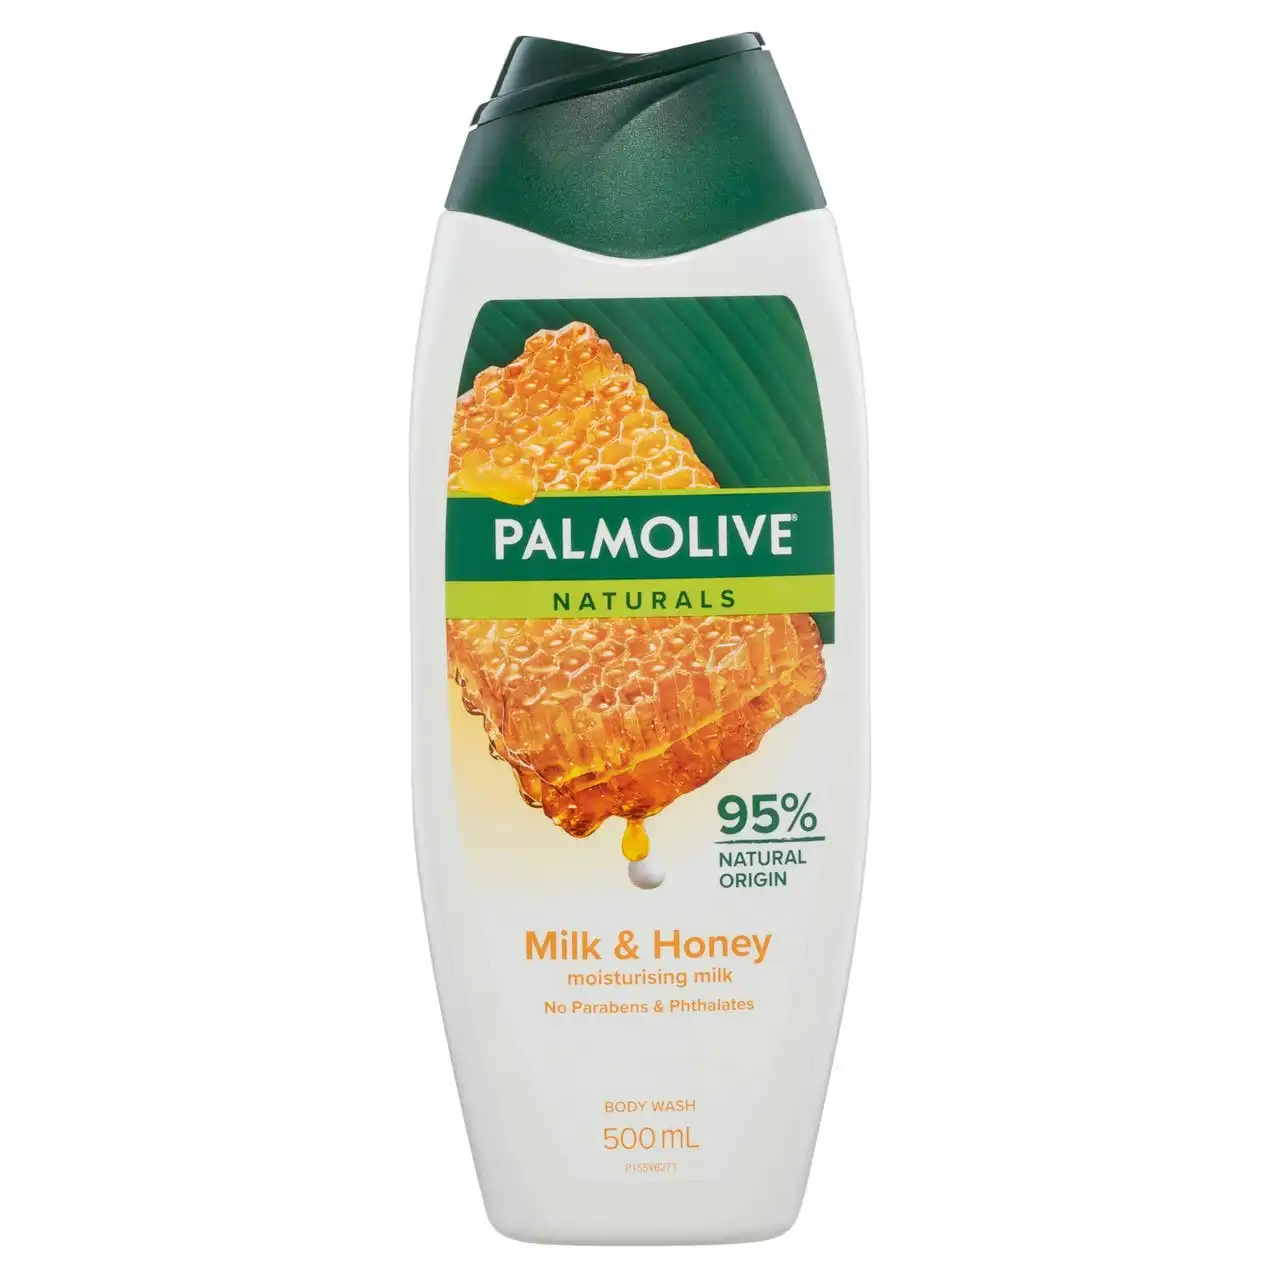 Palmolive Naturals Body Wash, 500mL, Milk and Honey, with Moisturising Milk, No Parabens Phthalates or Alcohol